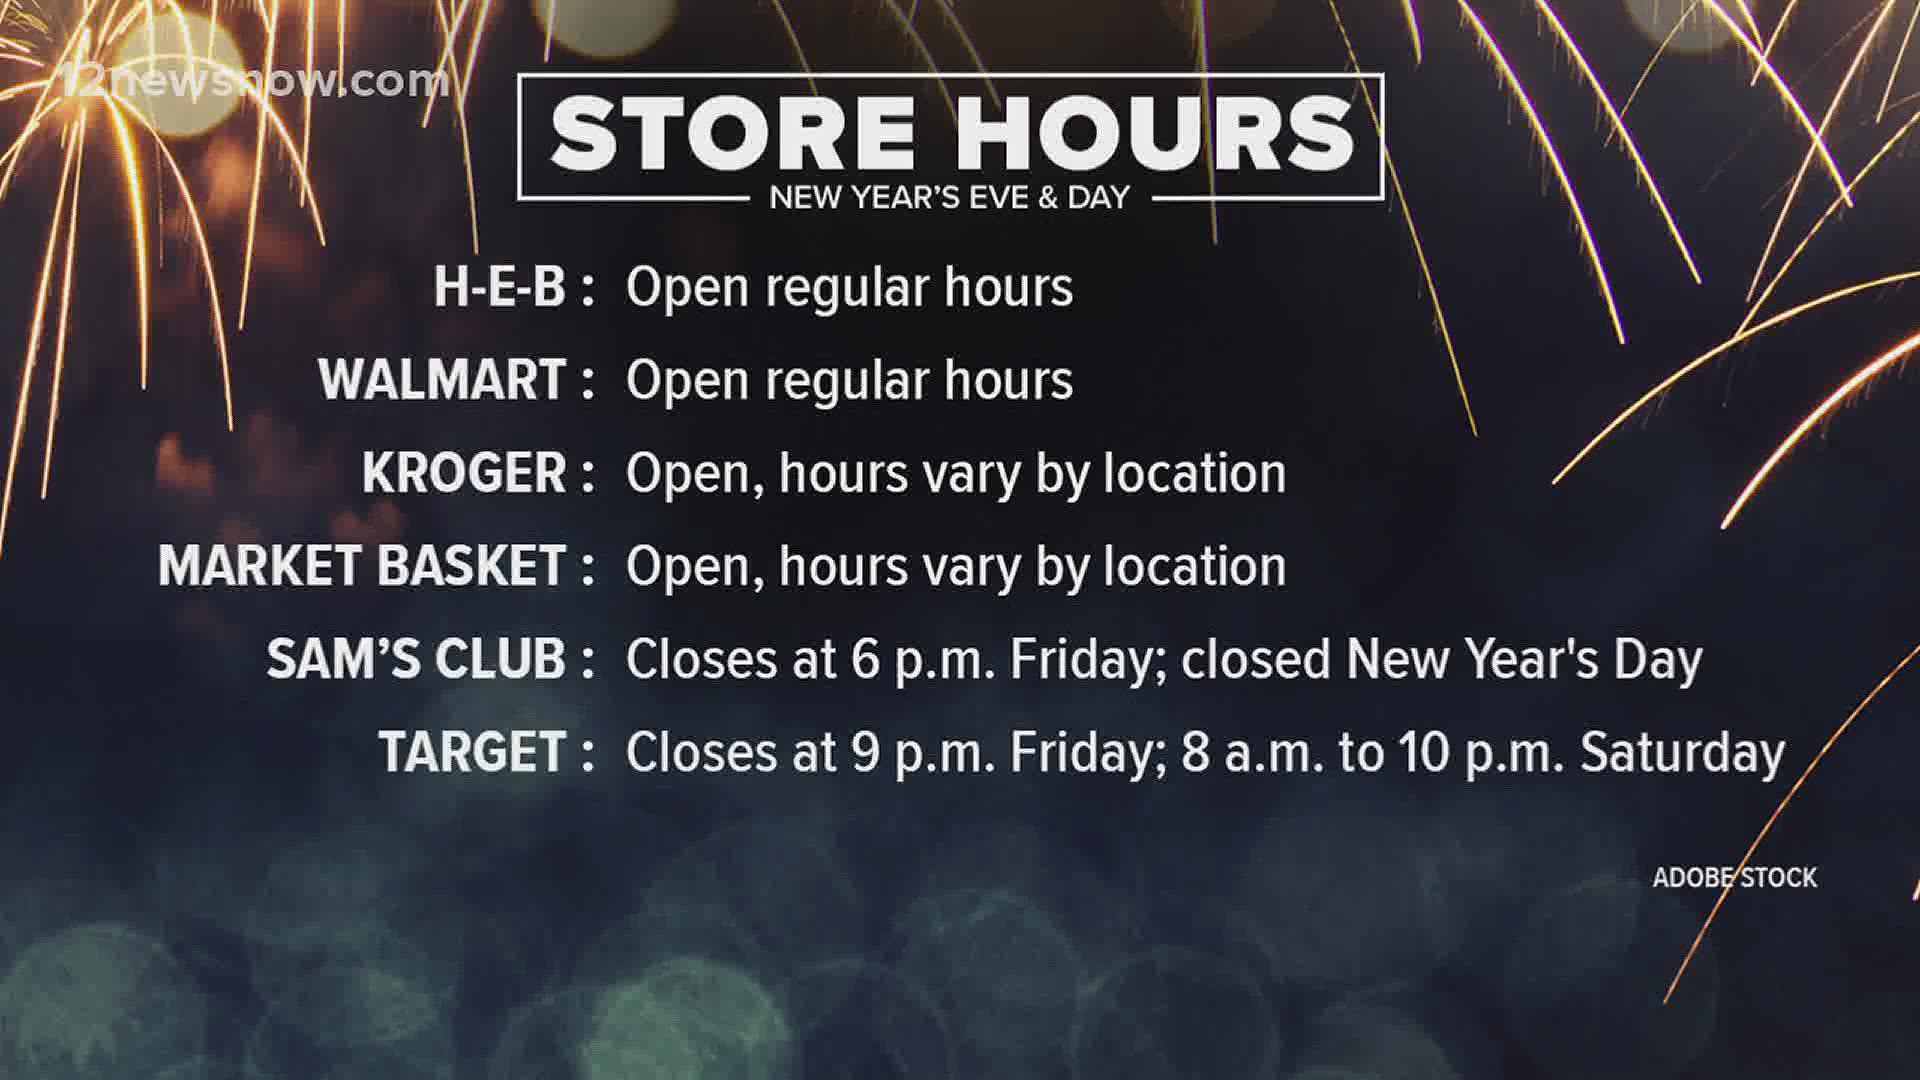 Check with your closest location to confirm hours as they may vary.